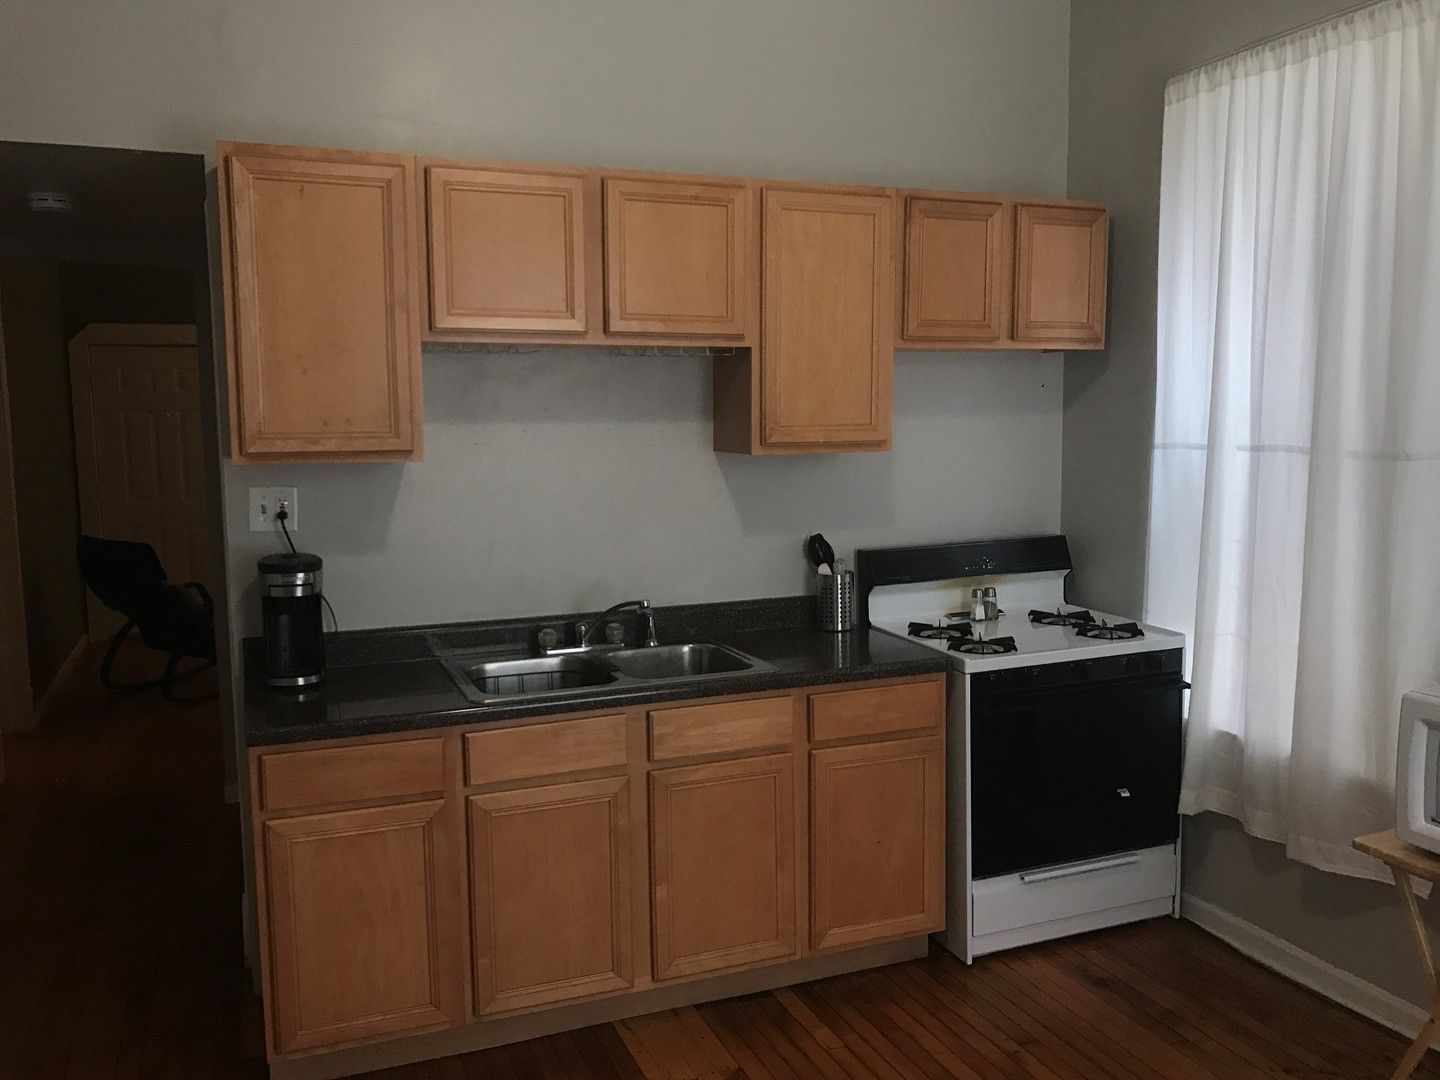 Photo 4: Photos: 2131 W Division Street Unit 1R in CHICAGO: CHI - West Town Residential Lease for lease ()  : MLS®# 09933612